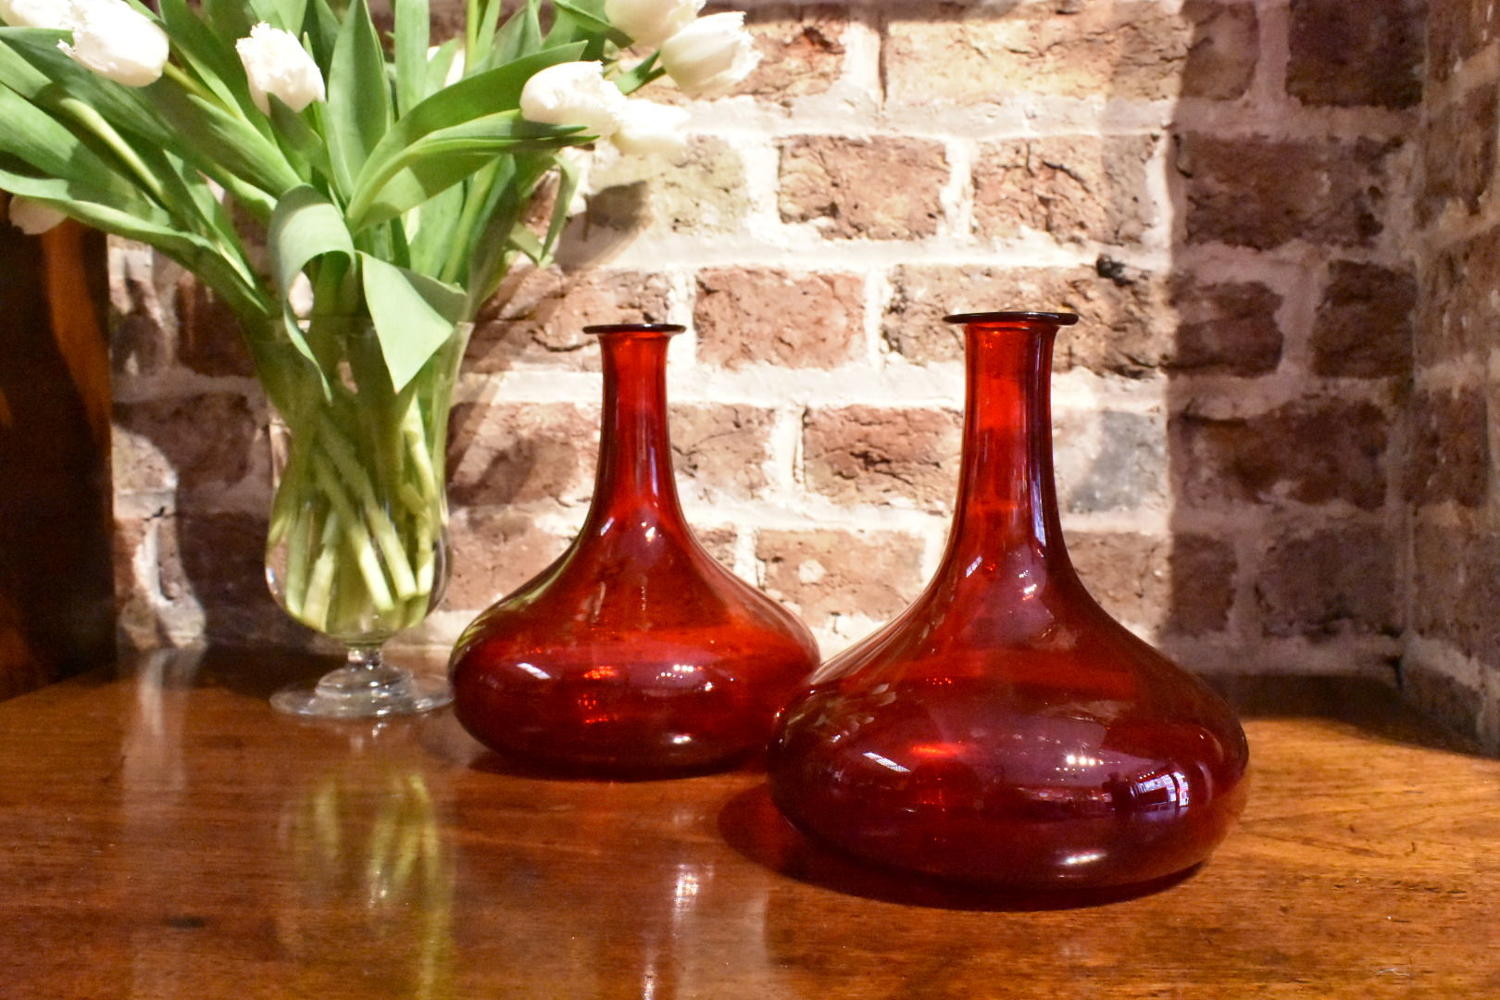 Rare pair of 19th century red glass ship's decanters